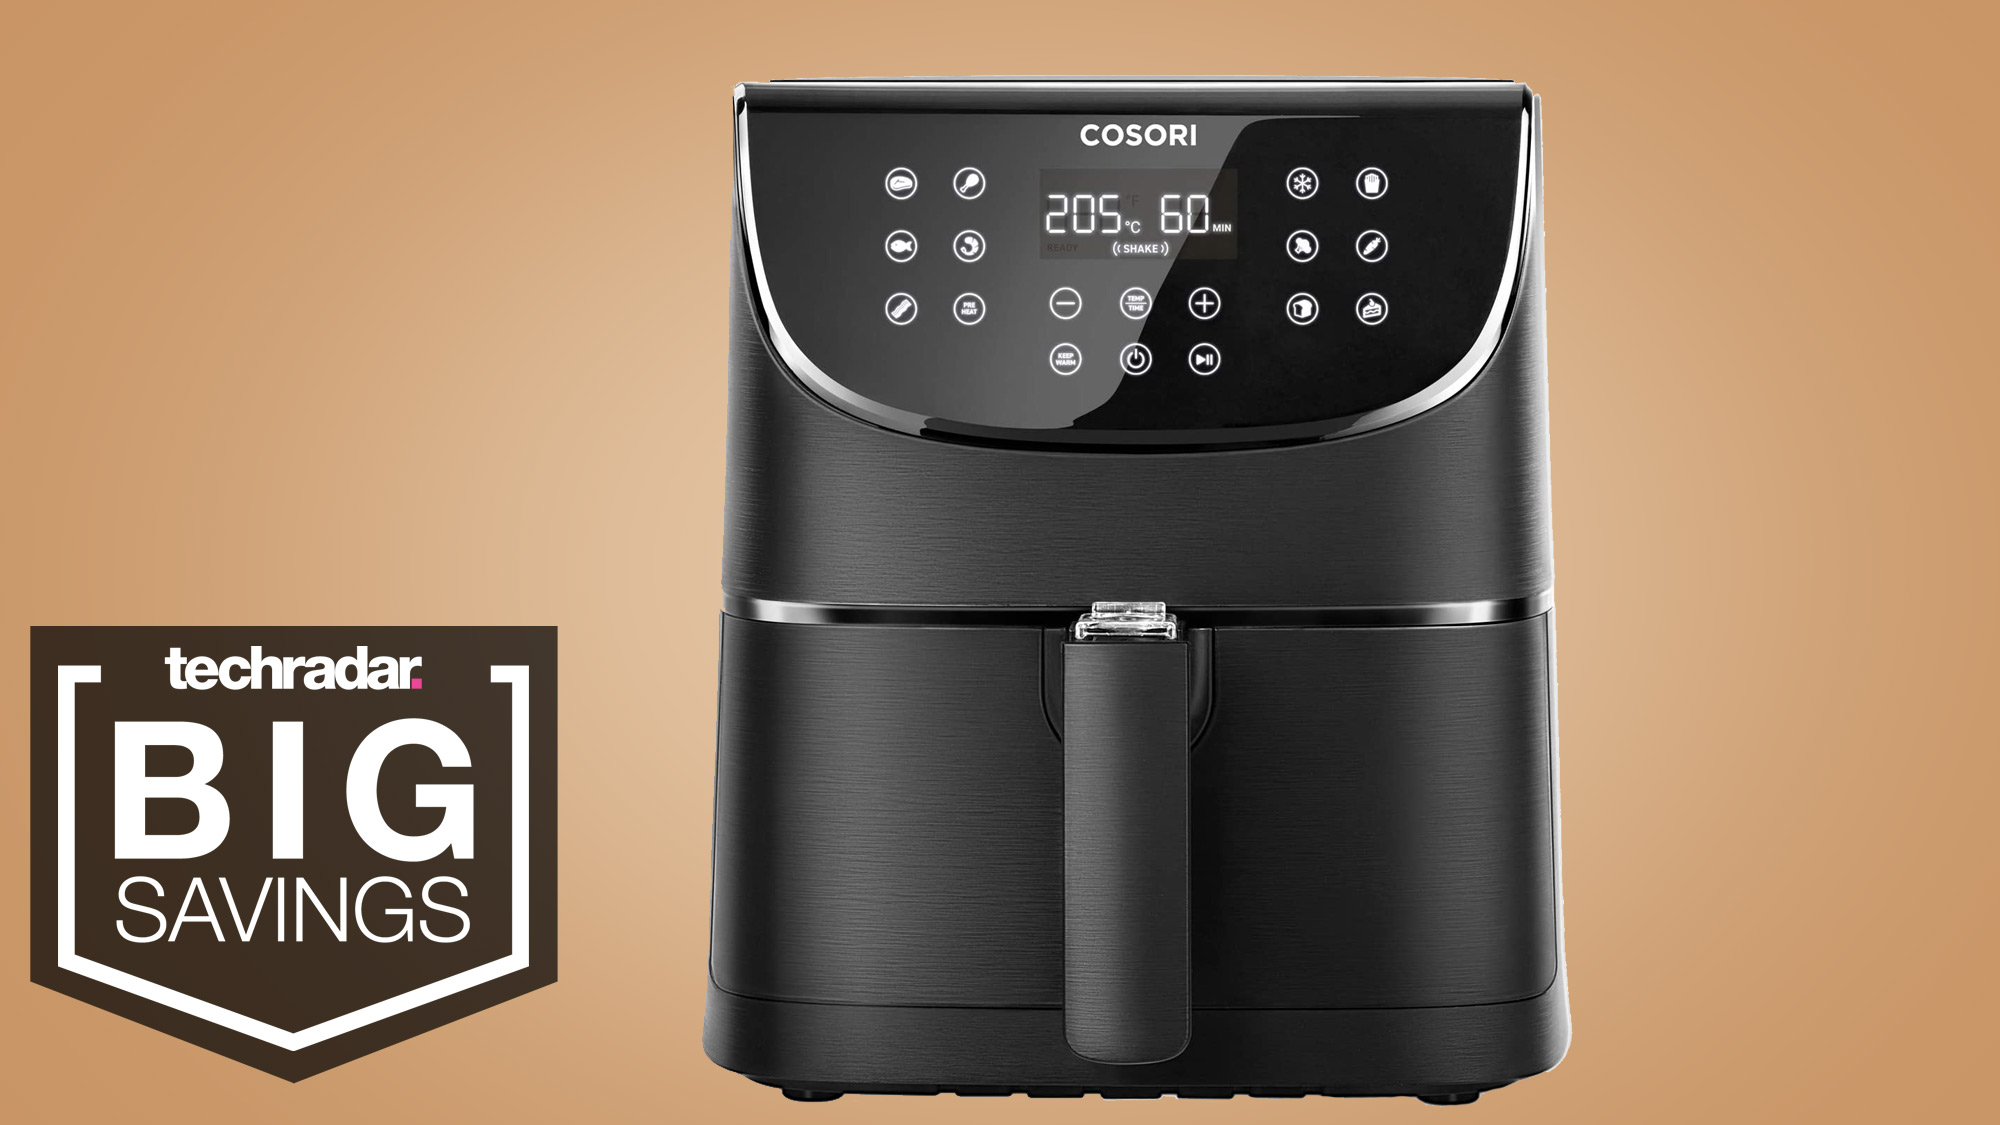 This Cosori air fryer is back to its Black Friday price | TechRadar